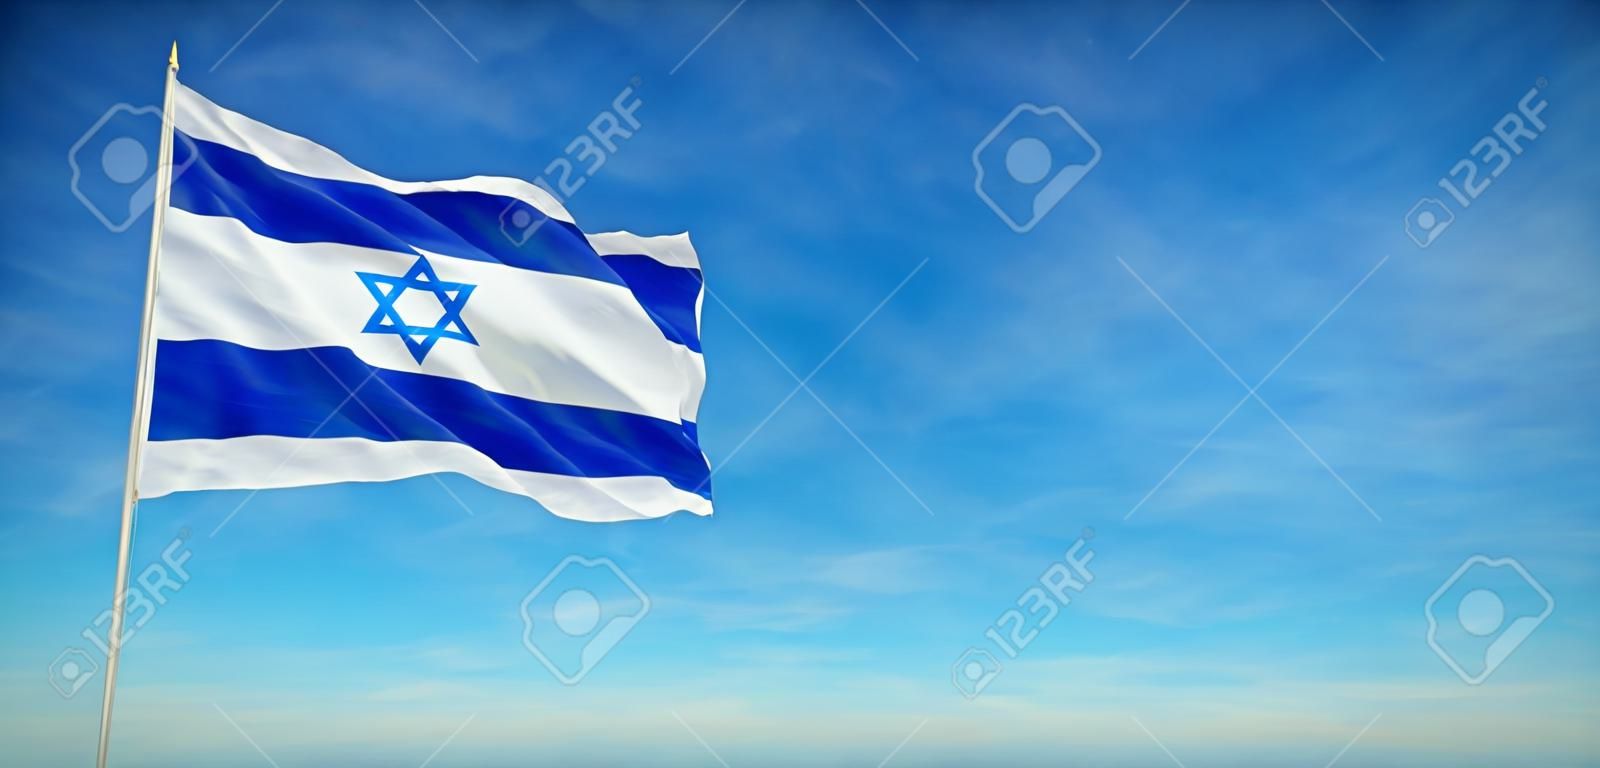 The National flag of Israel blowing in the wind in front of a clear blue sky